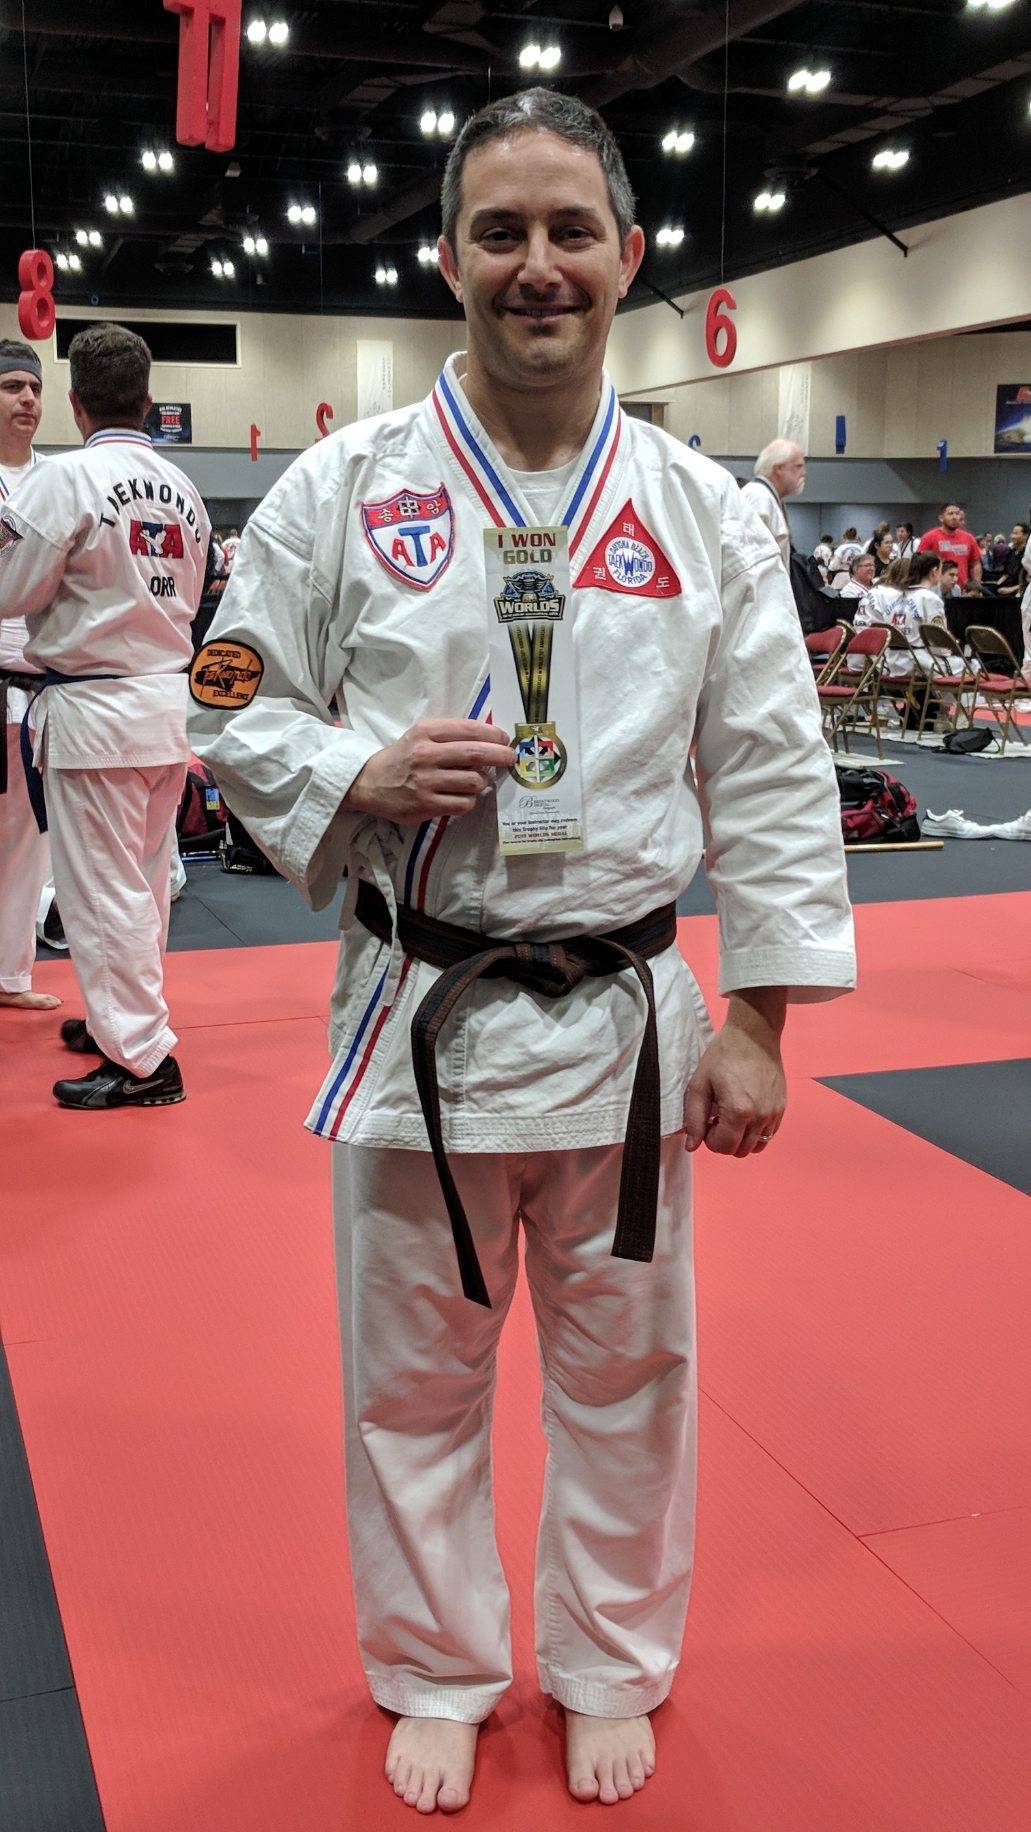 Assistant City Manager, Alan Rosen, shows his first place ribbon in forms at the A Songahm Taekwondo World Expo in Little Rock. Courtesy photo